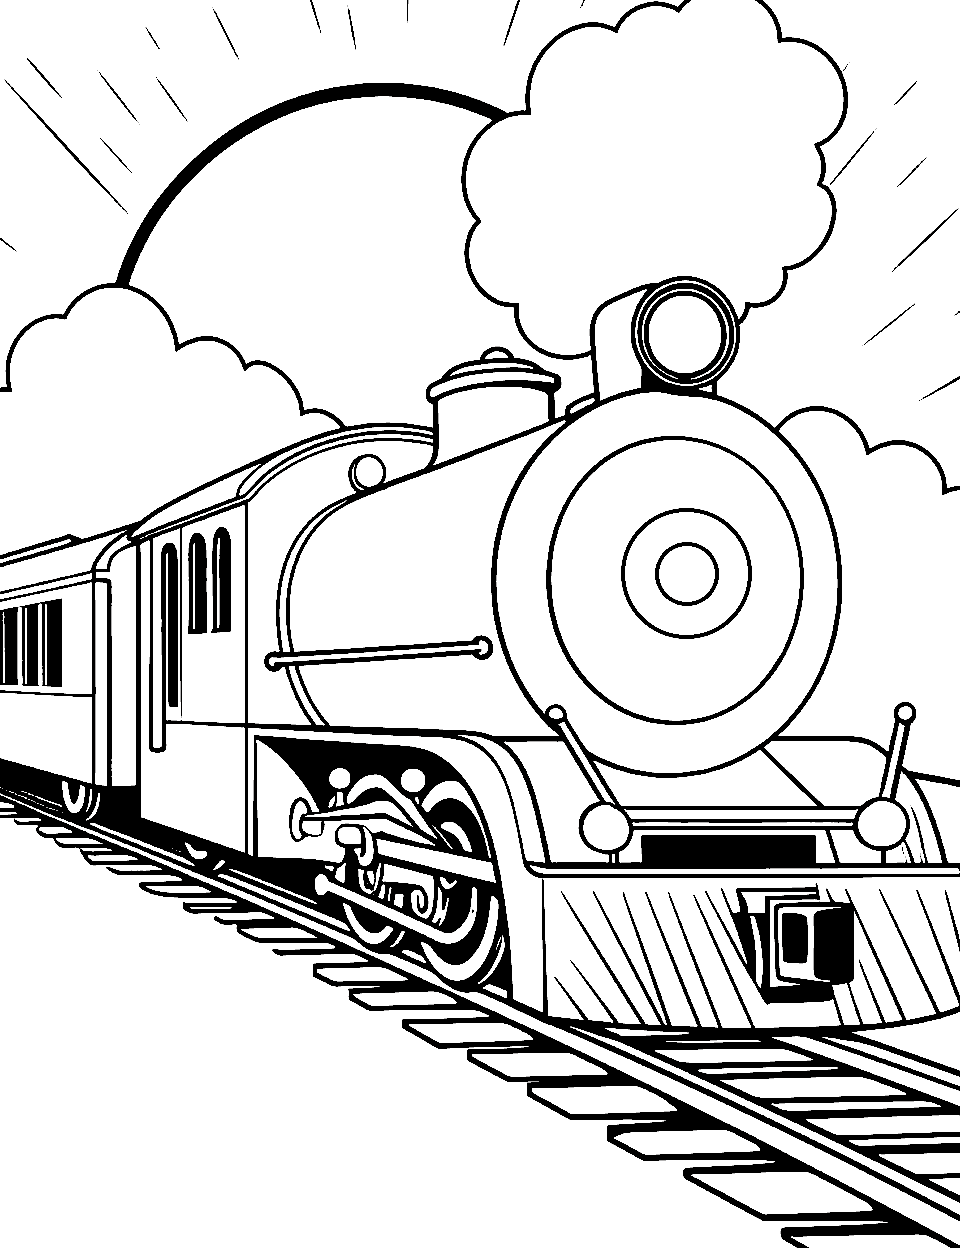 Sunset Express Coloring Page - A train journeying during a stunning sunset.